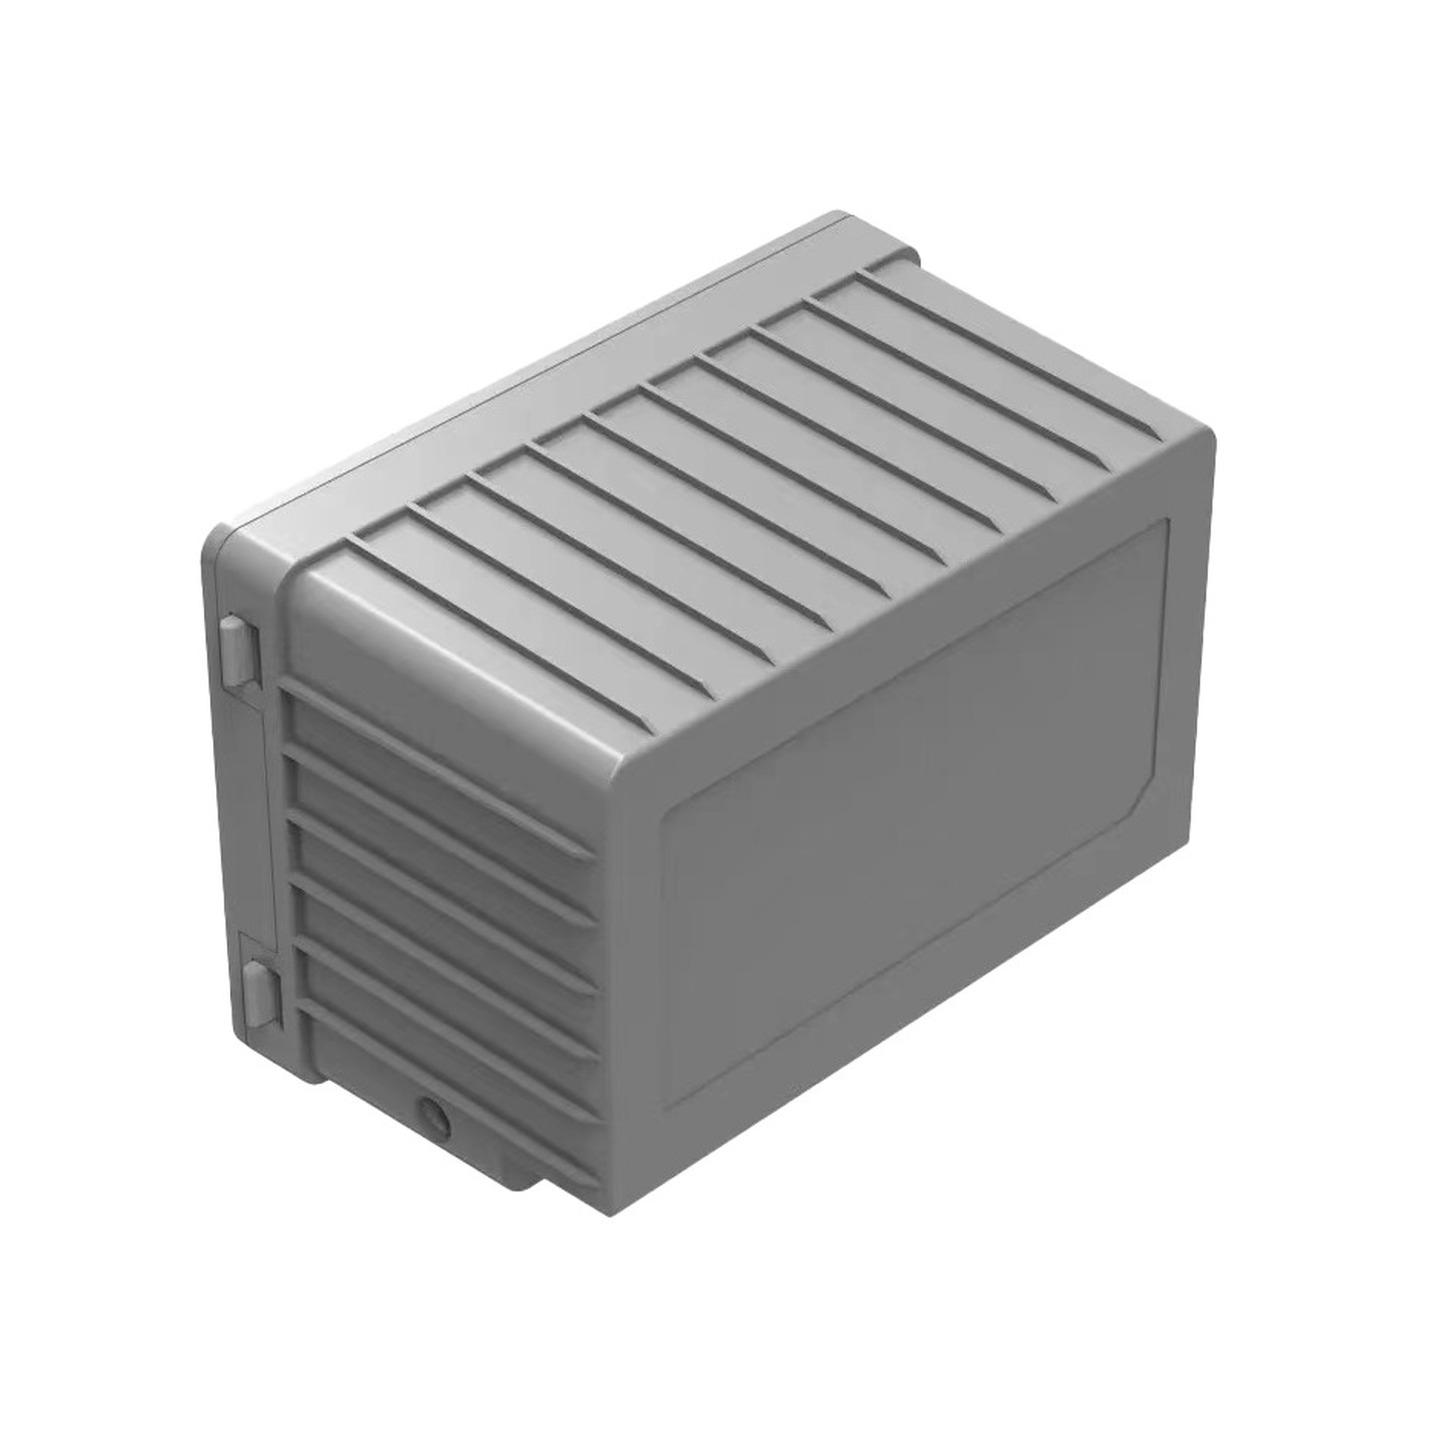 7.8Ah Removable Lithium Battery Version 3 to Suit Brass Monkey Fridge/Freezers with Battery Support